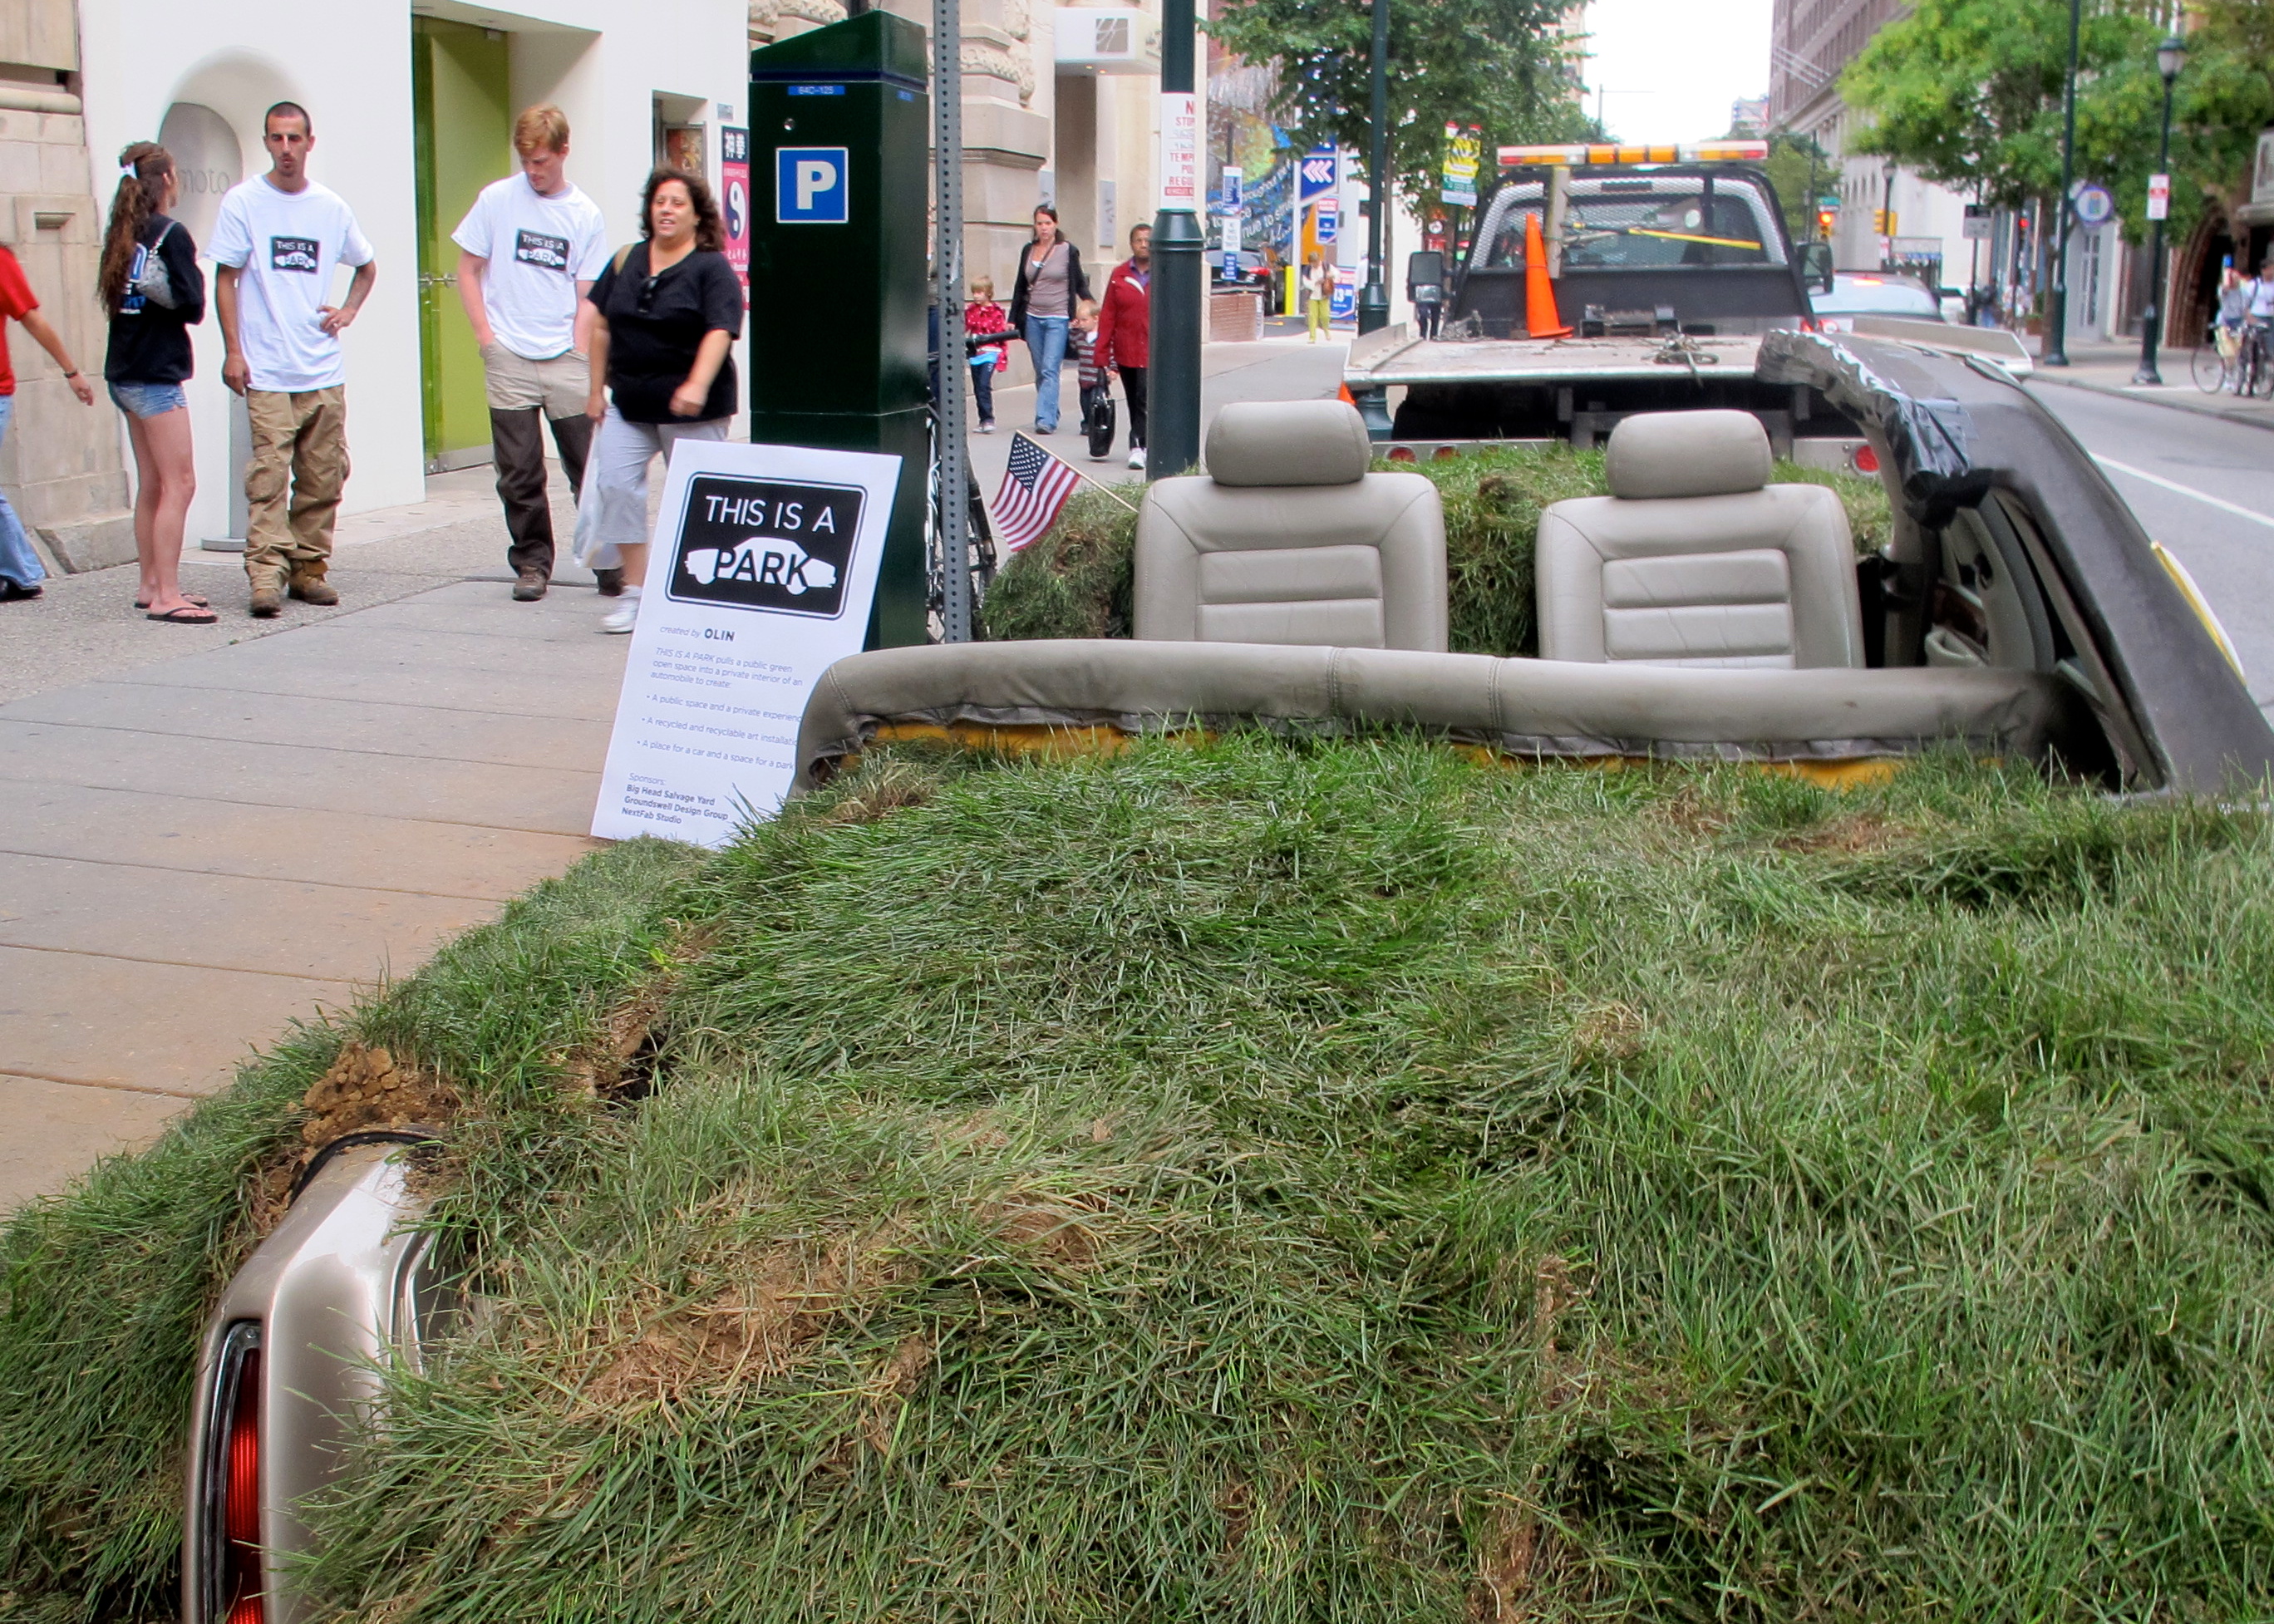 Meet up on Wednesday to discuss this year's Park(ing) Day.